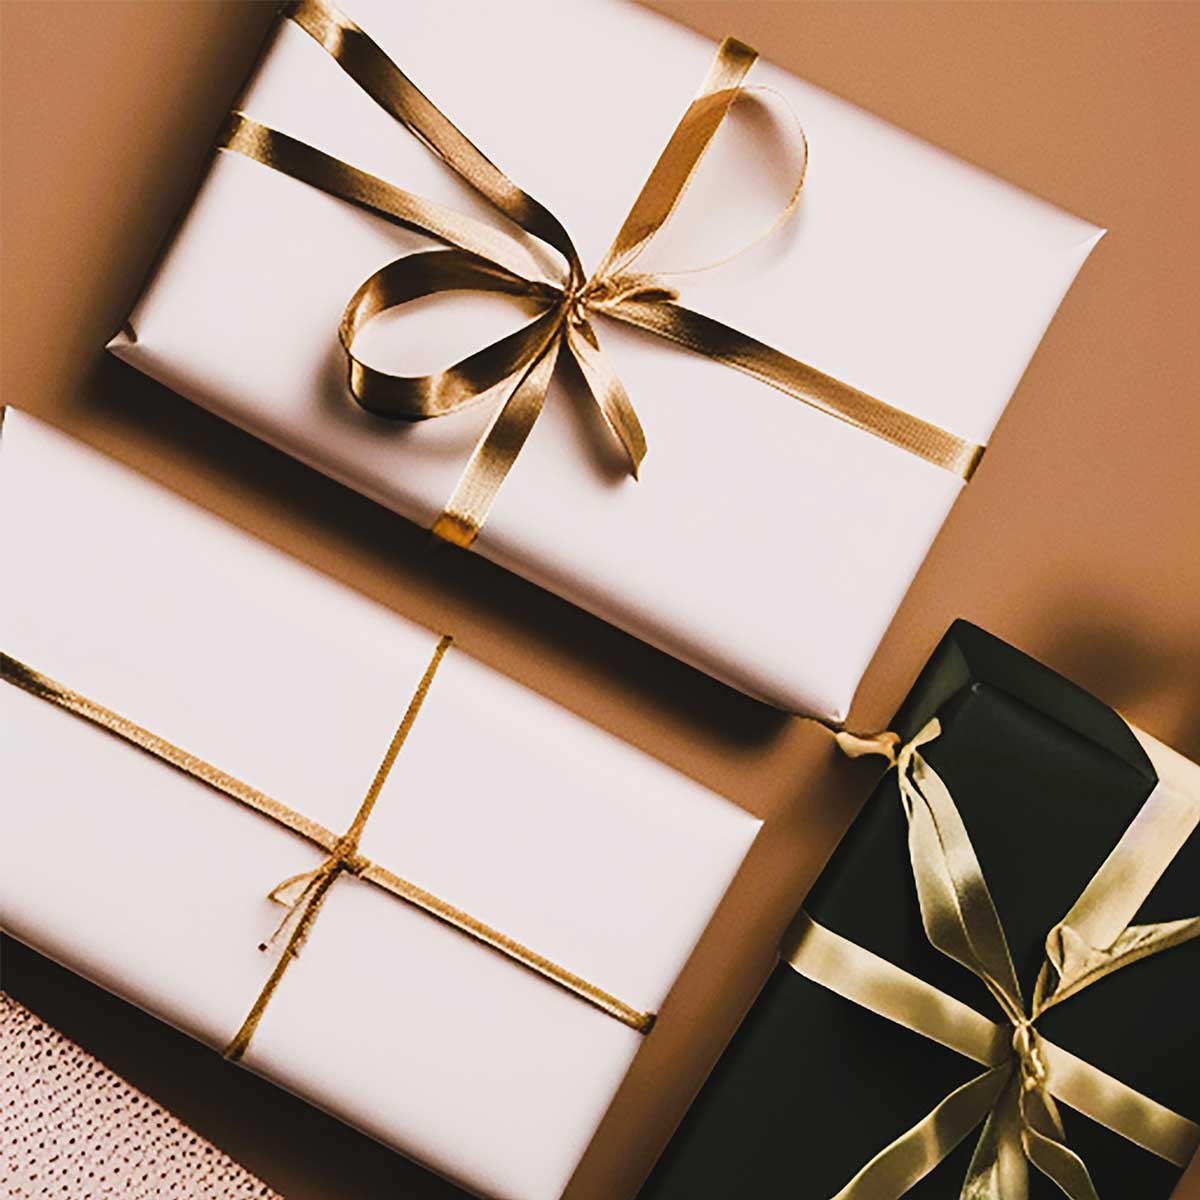 Black and white wrapped presents with gold ribbon on brown background.